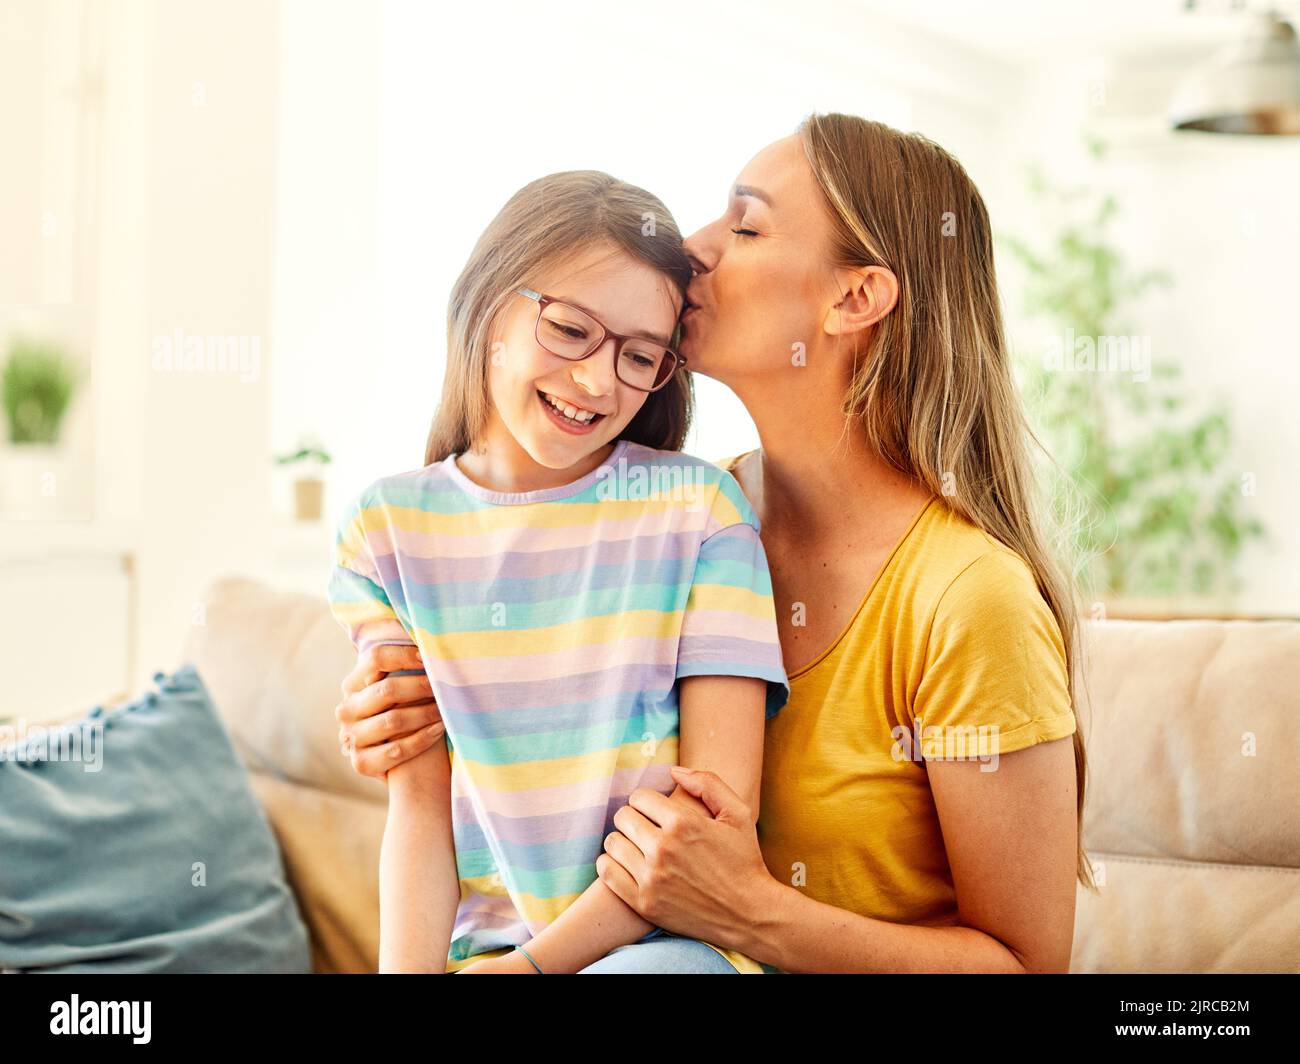 child mother family parent home woman happy playing daughter kid together indoor hug hugging kiss Stock Photo